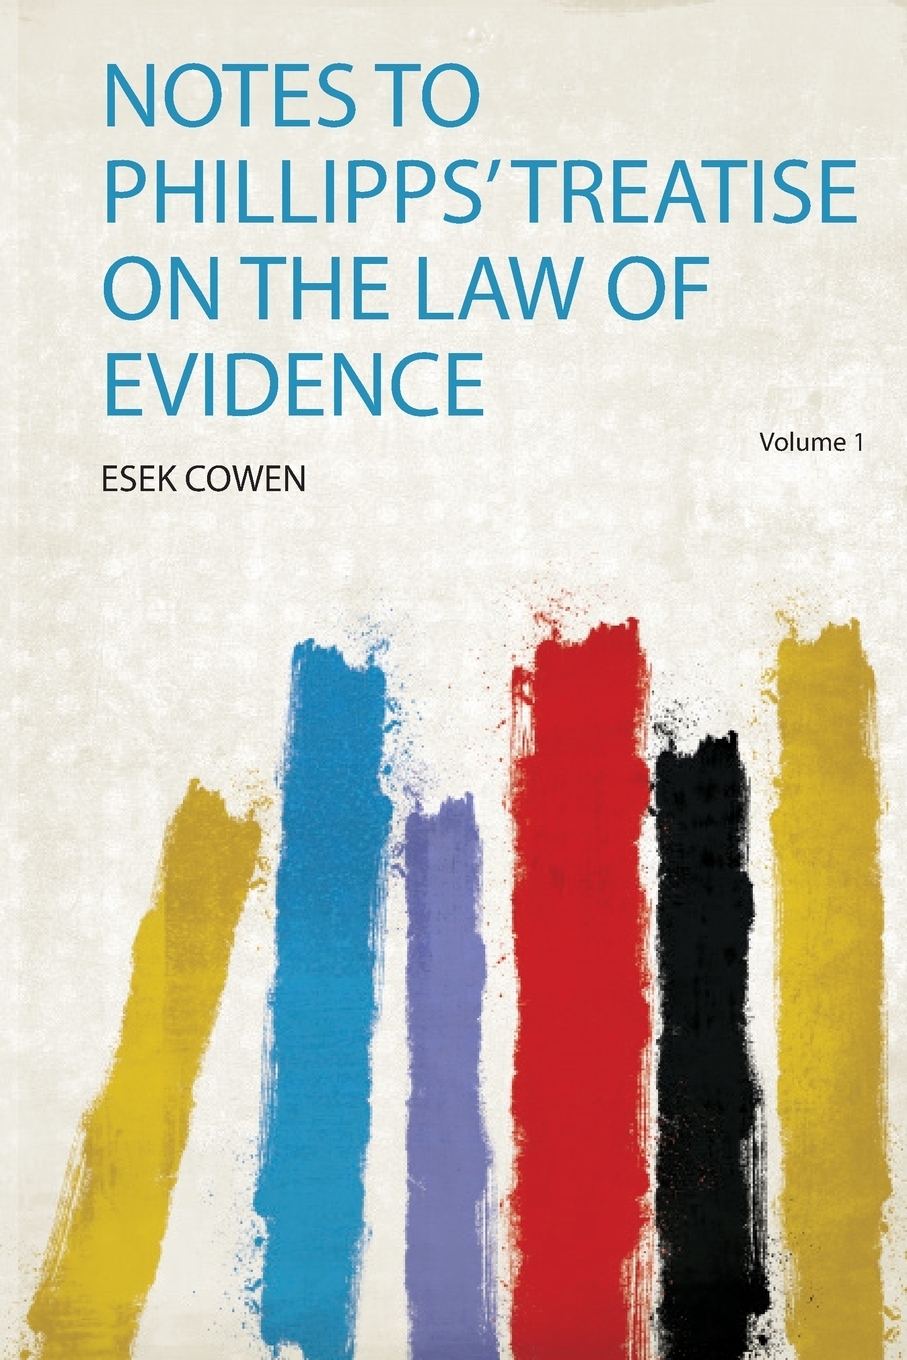 фото Notes to Phillipps' Treatise on the Law of Evidence